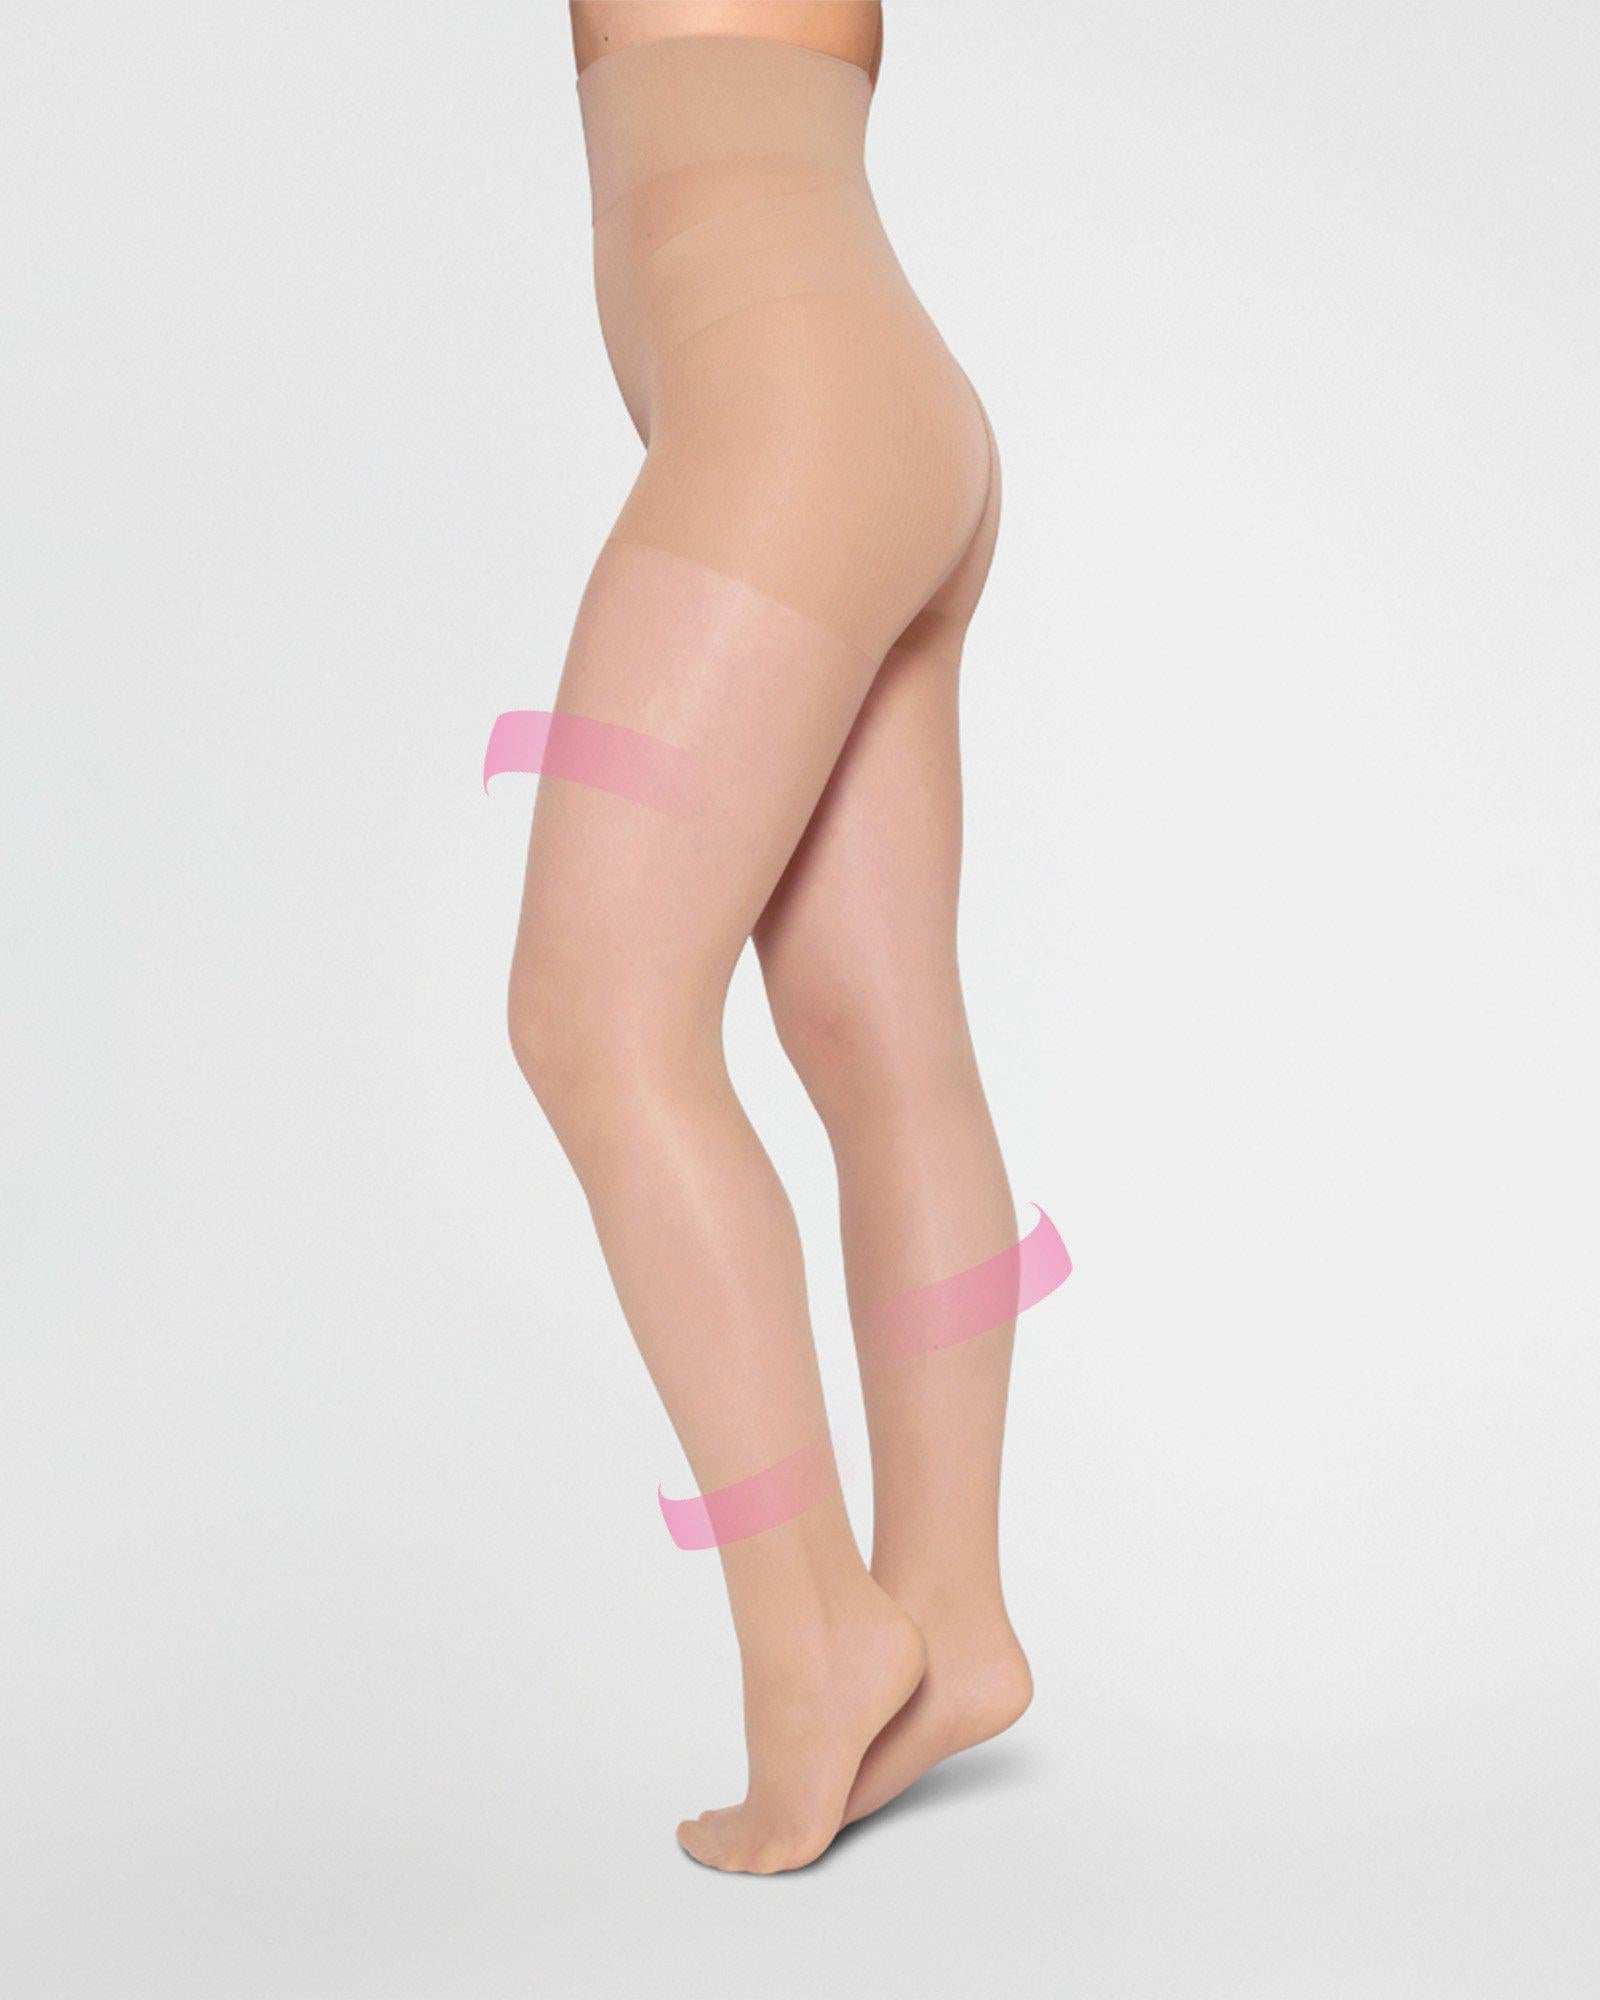 Irma Support Tights Sand 30 den | Shop now - Swedish Stockings